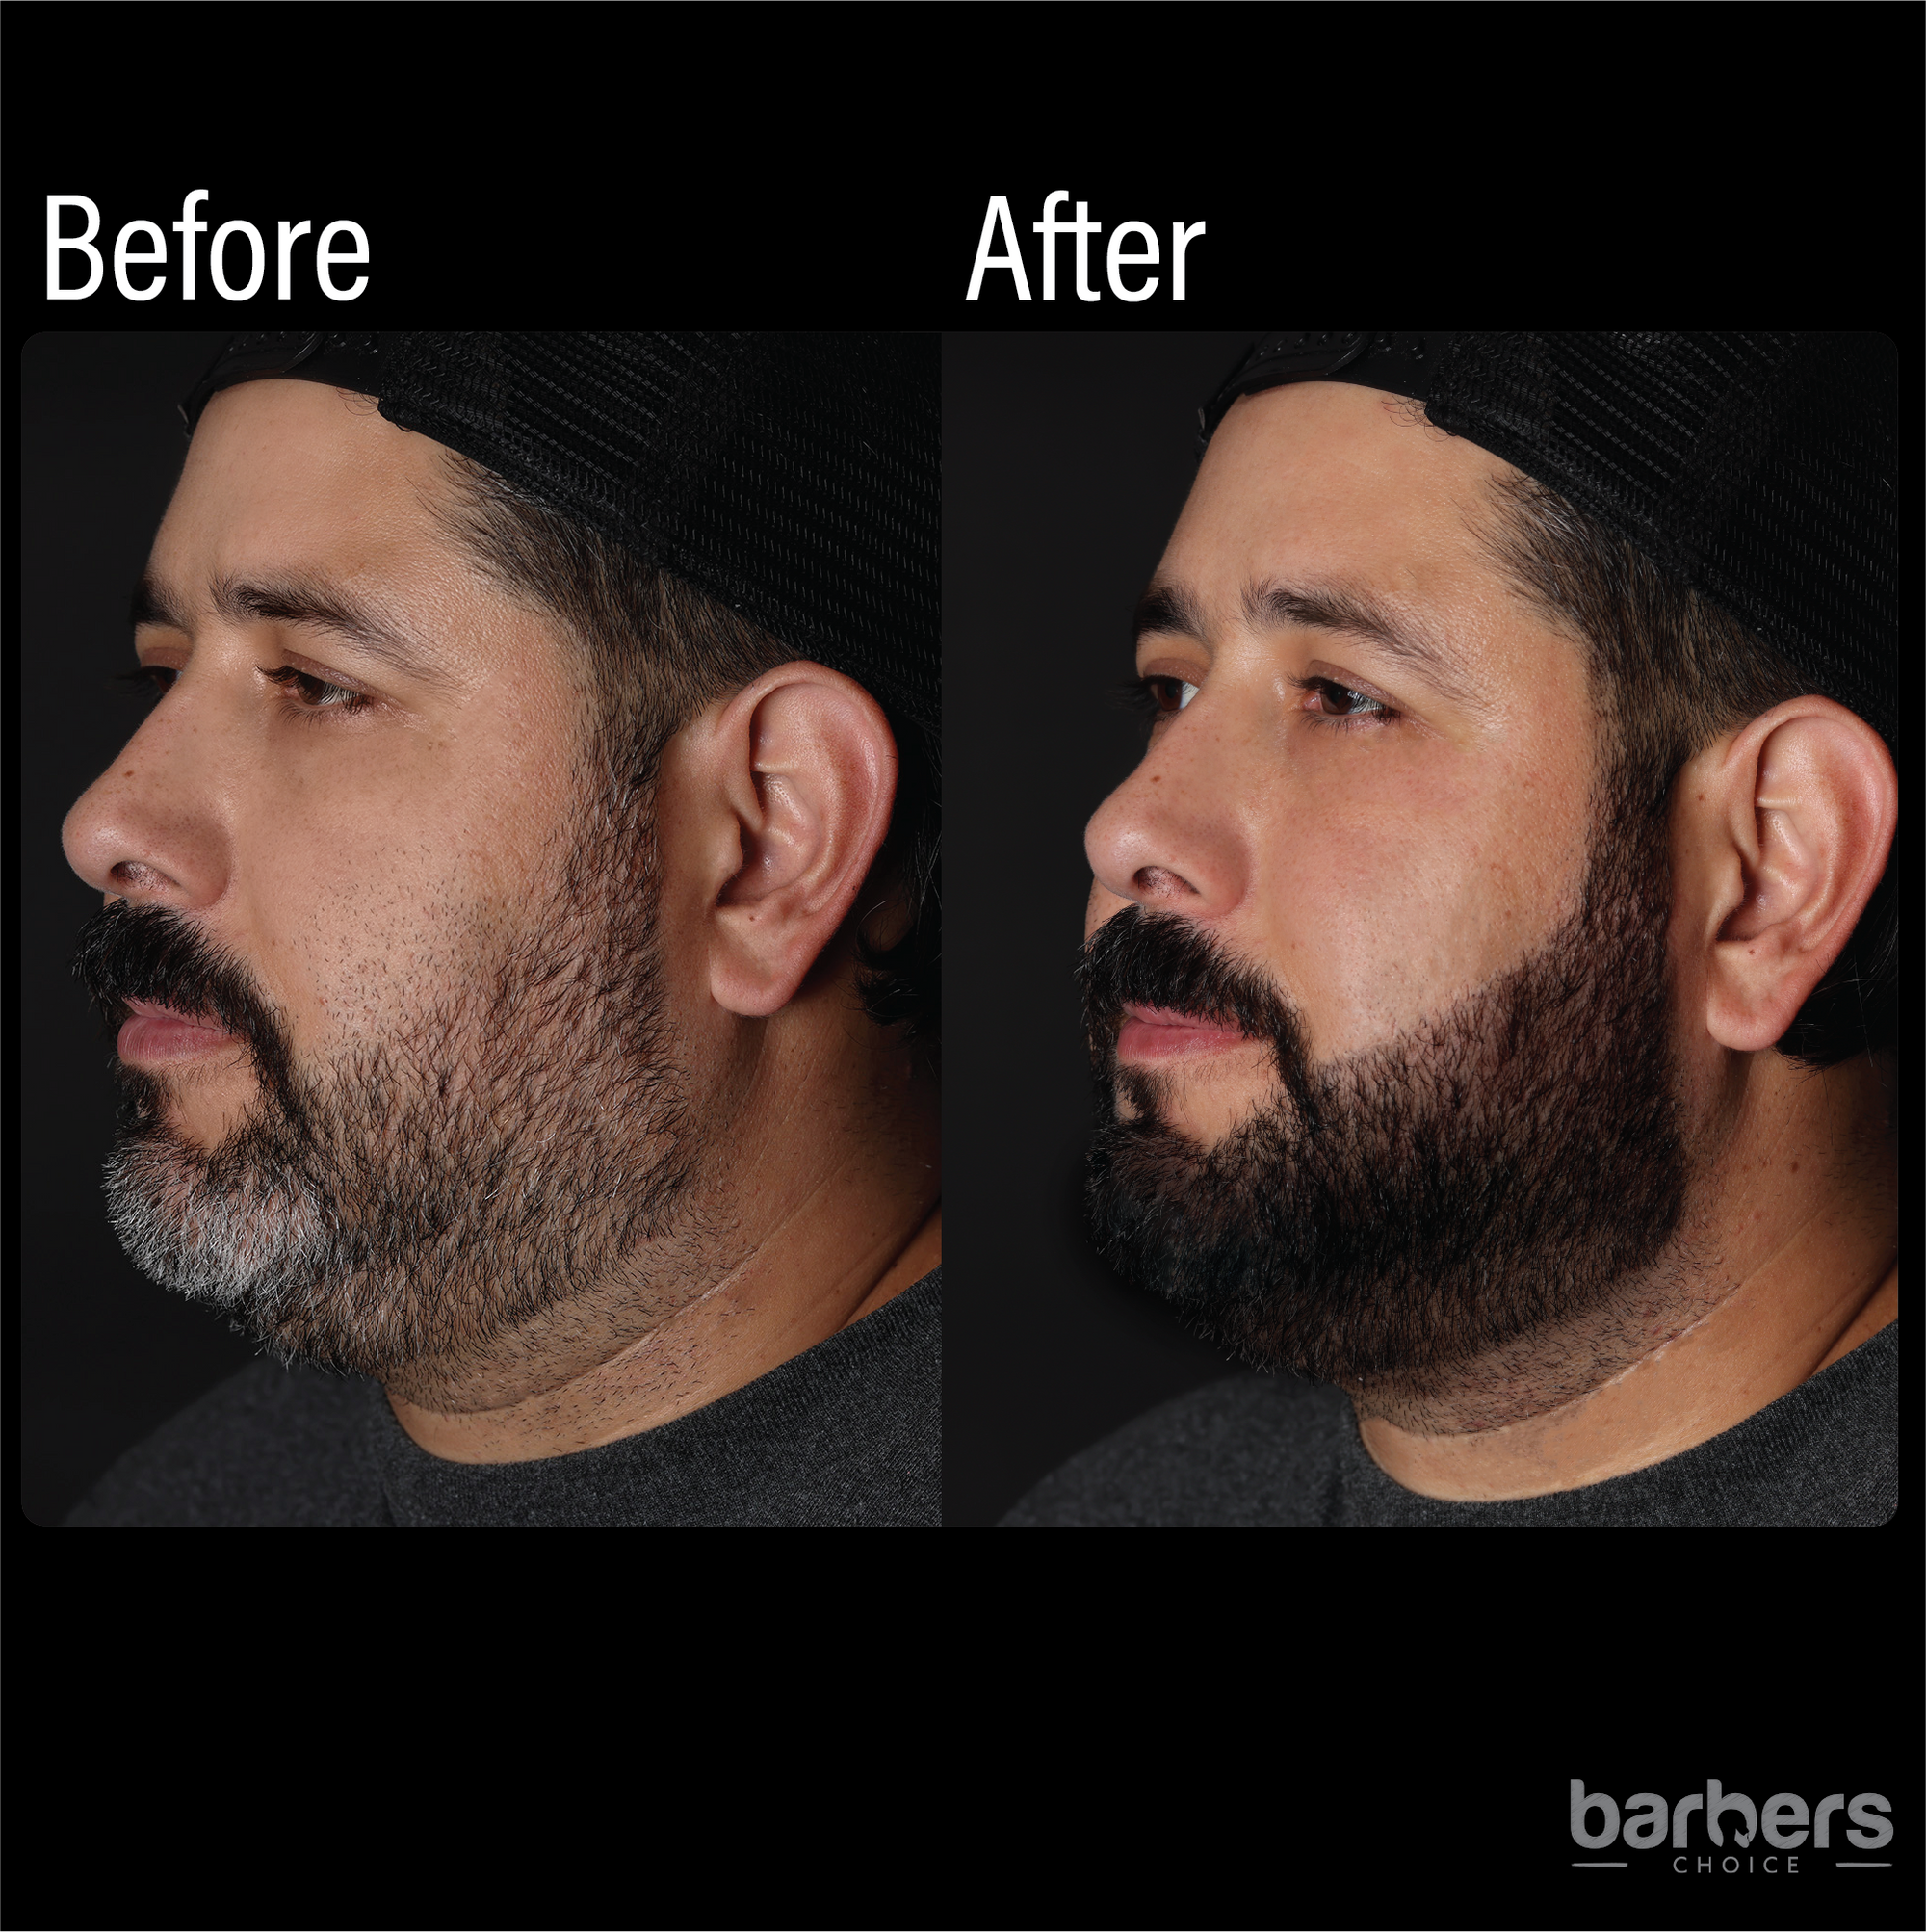 Godefroy Barber's Choice Beard Color 2 Application